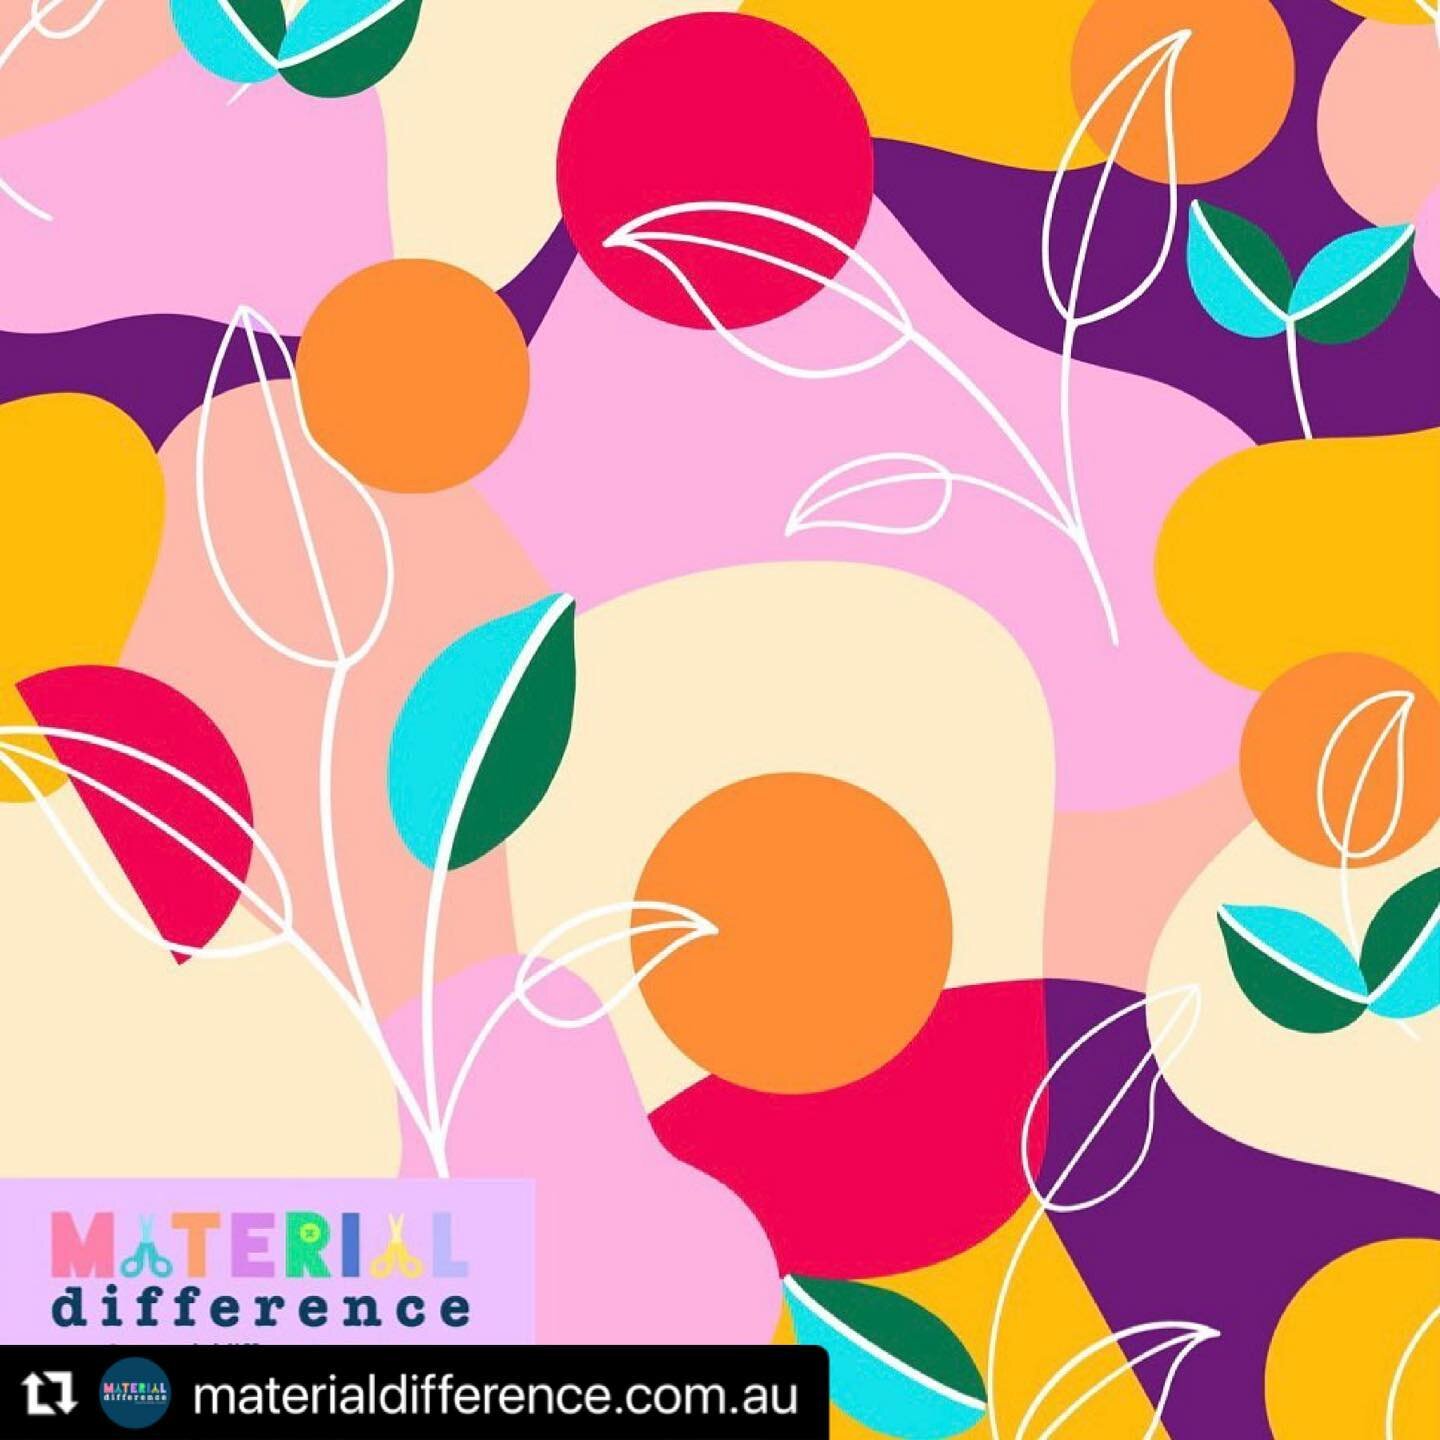 Tropical Sunset - this is the second of three exclusive designs available as fabric for a limited time over at @materialdifference.com.au! ❤️
&bull;
 #Repost @materialdifference.com.au with @make_repost
・・・
&bull; TROPICAL SUNSET &bull;
Our gorgeous 